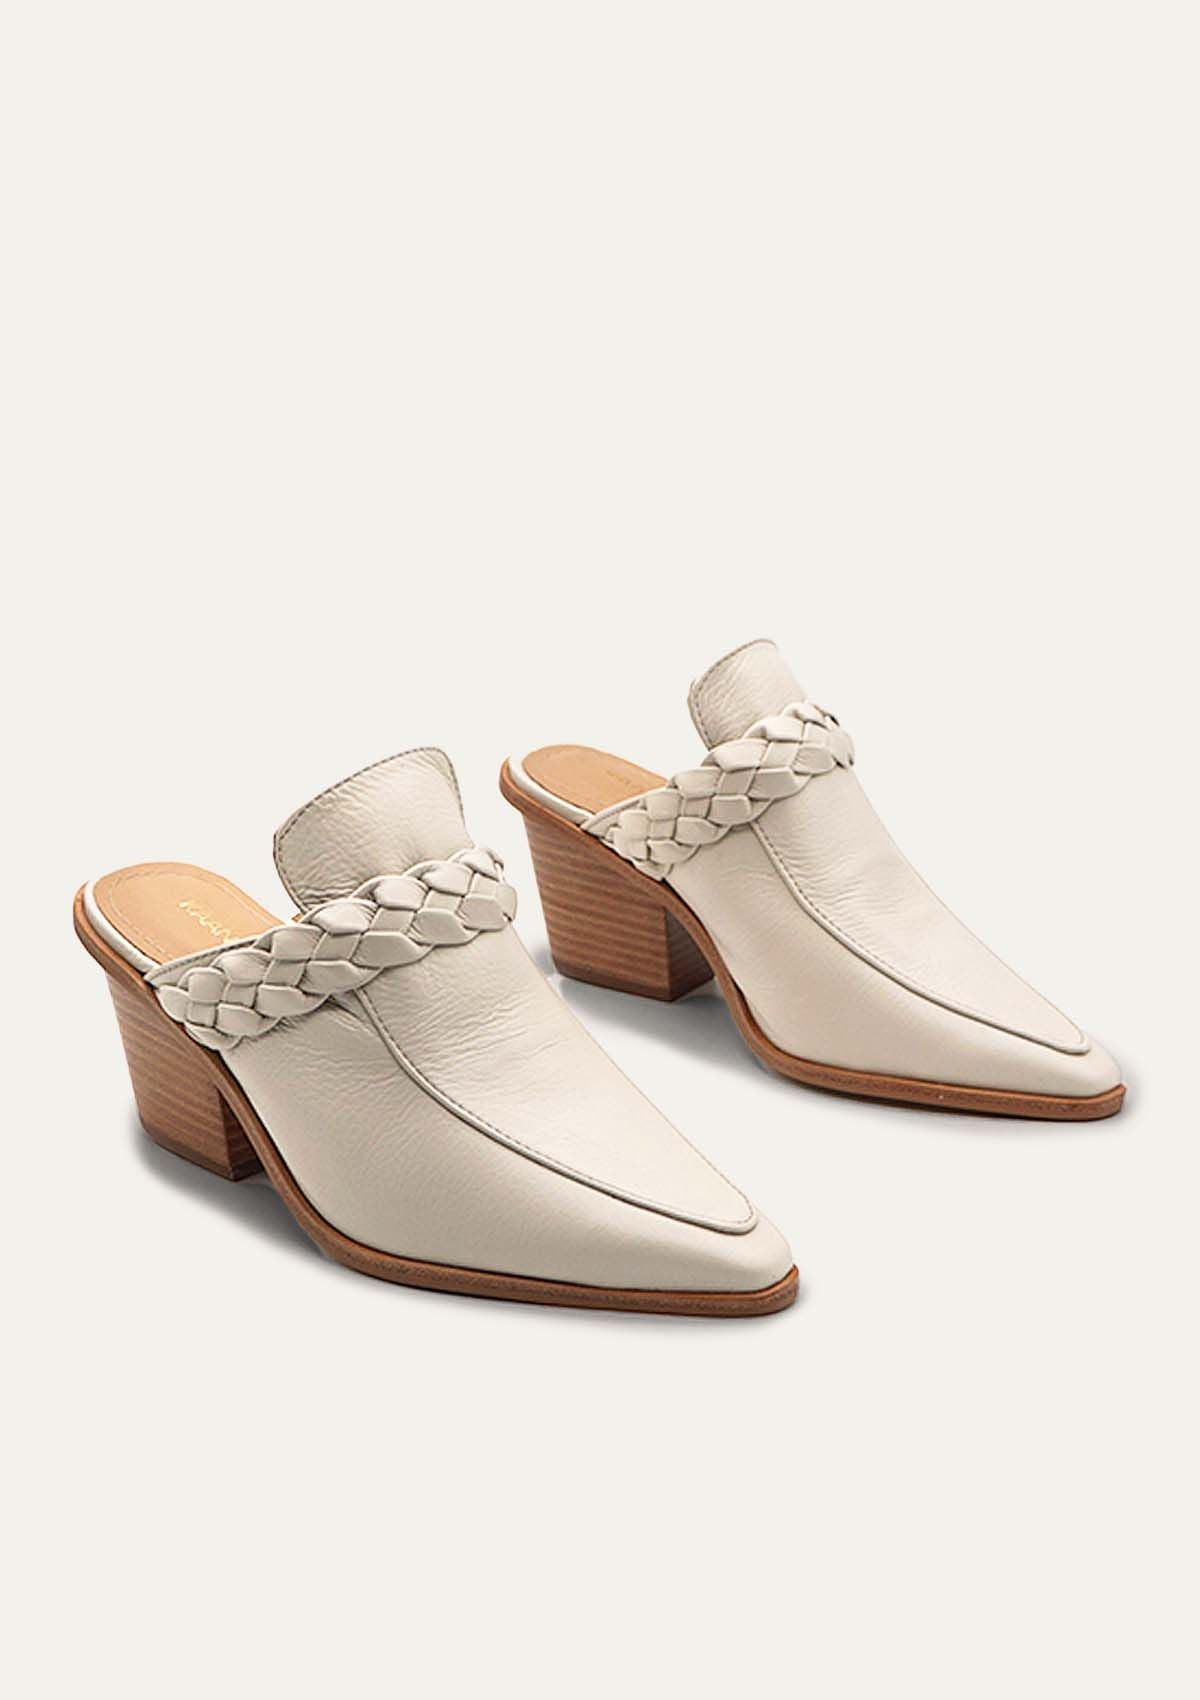 Turin Loafer Mule Bootie